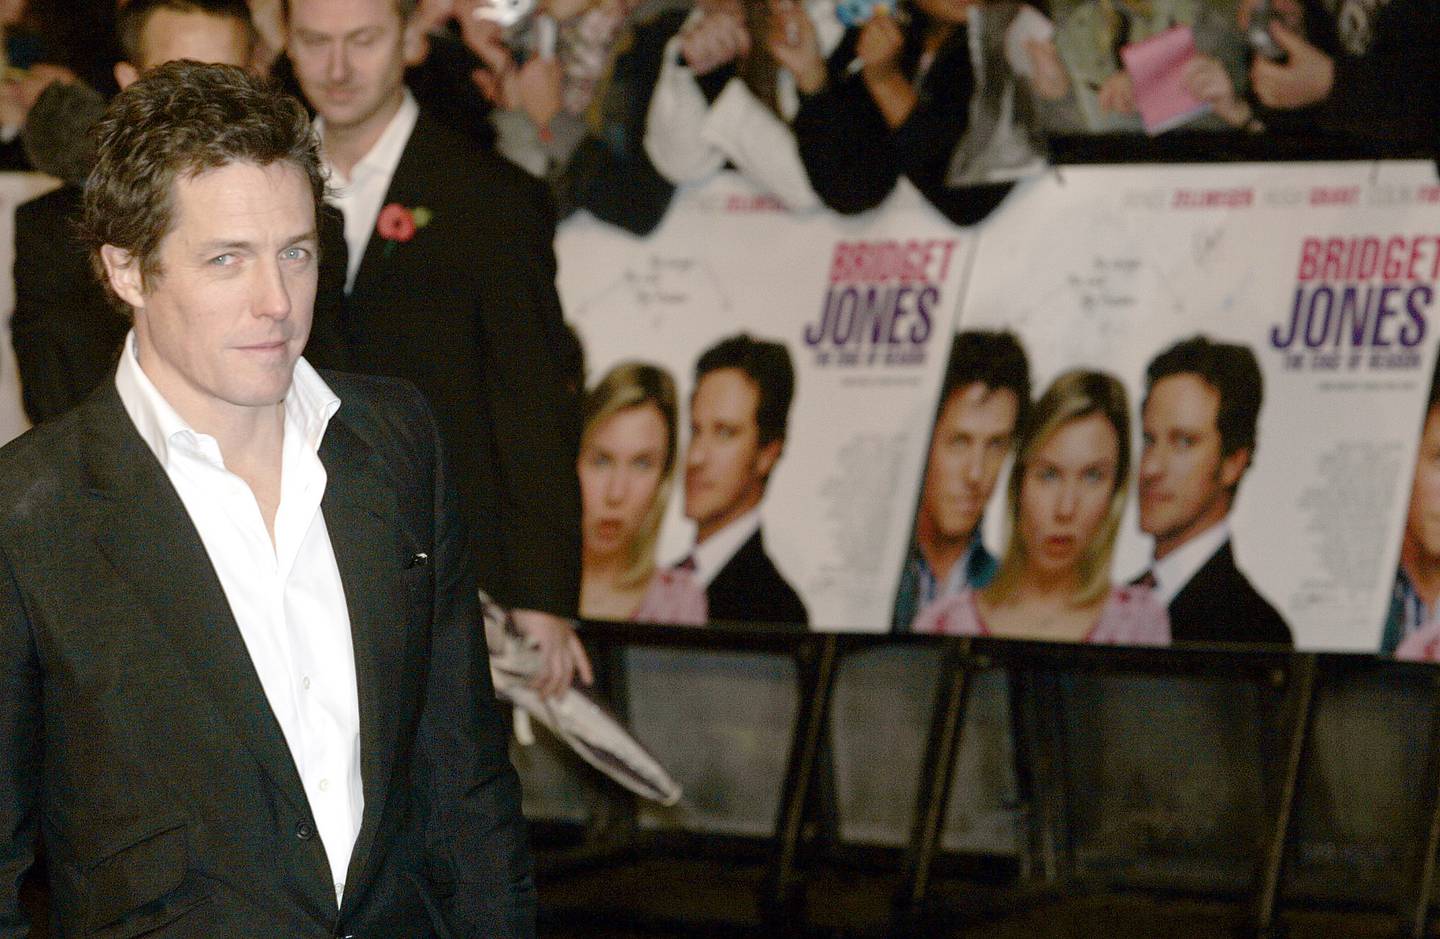 Actor Hugh Grant star of the film 'Bridget Jones: The Edge of Reason' poses for  photographers outside  the Odeon Leicester Square in London before the premiere of the film Tuesday Nov. 9, 2004. (AP Photo/Adam Butler)